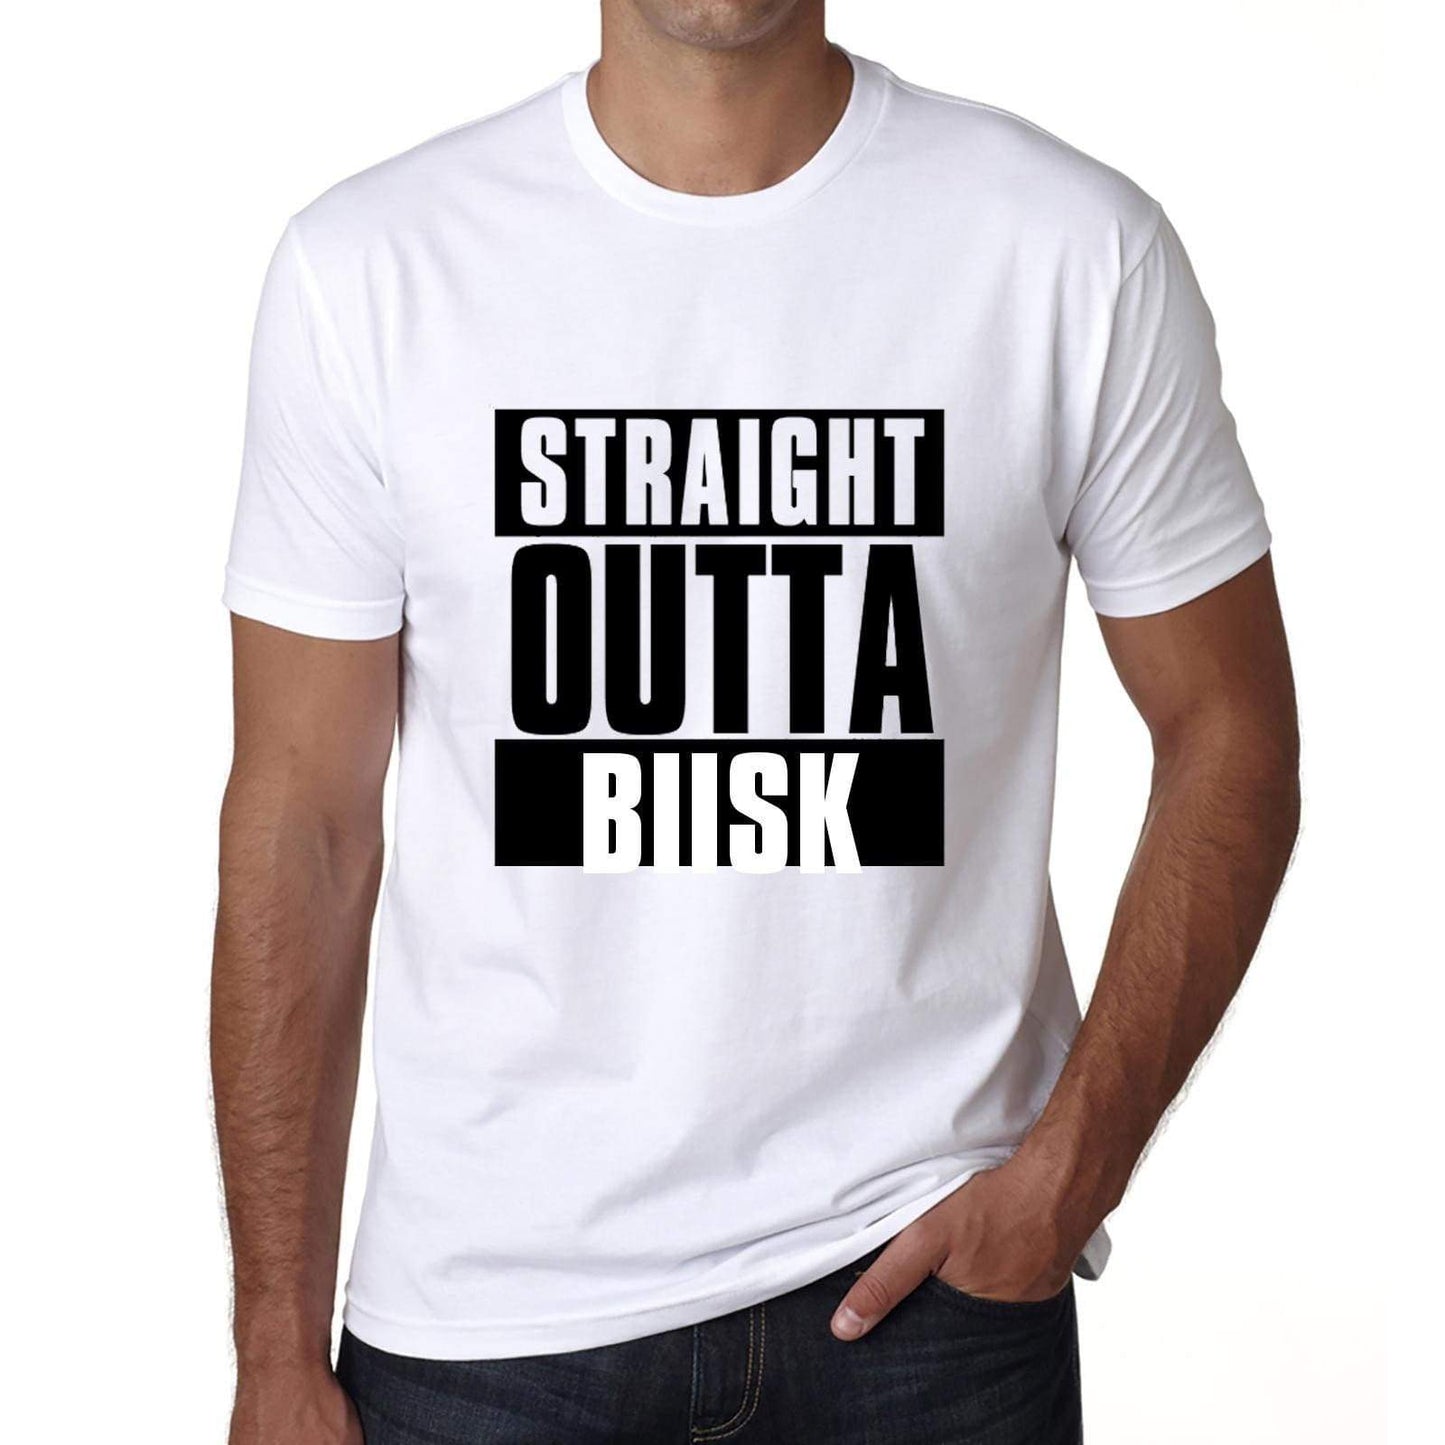 Straight Outta Biisk Mens Short Sleeve Round Neck T-Shirt 00027 - White / S - Casual